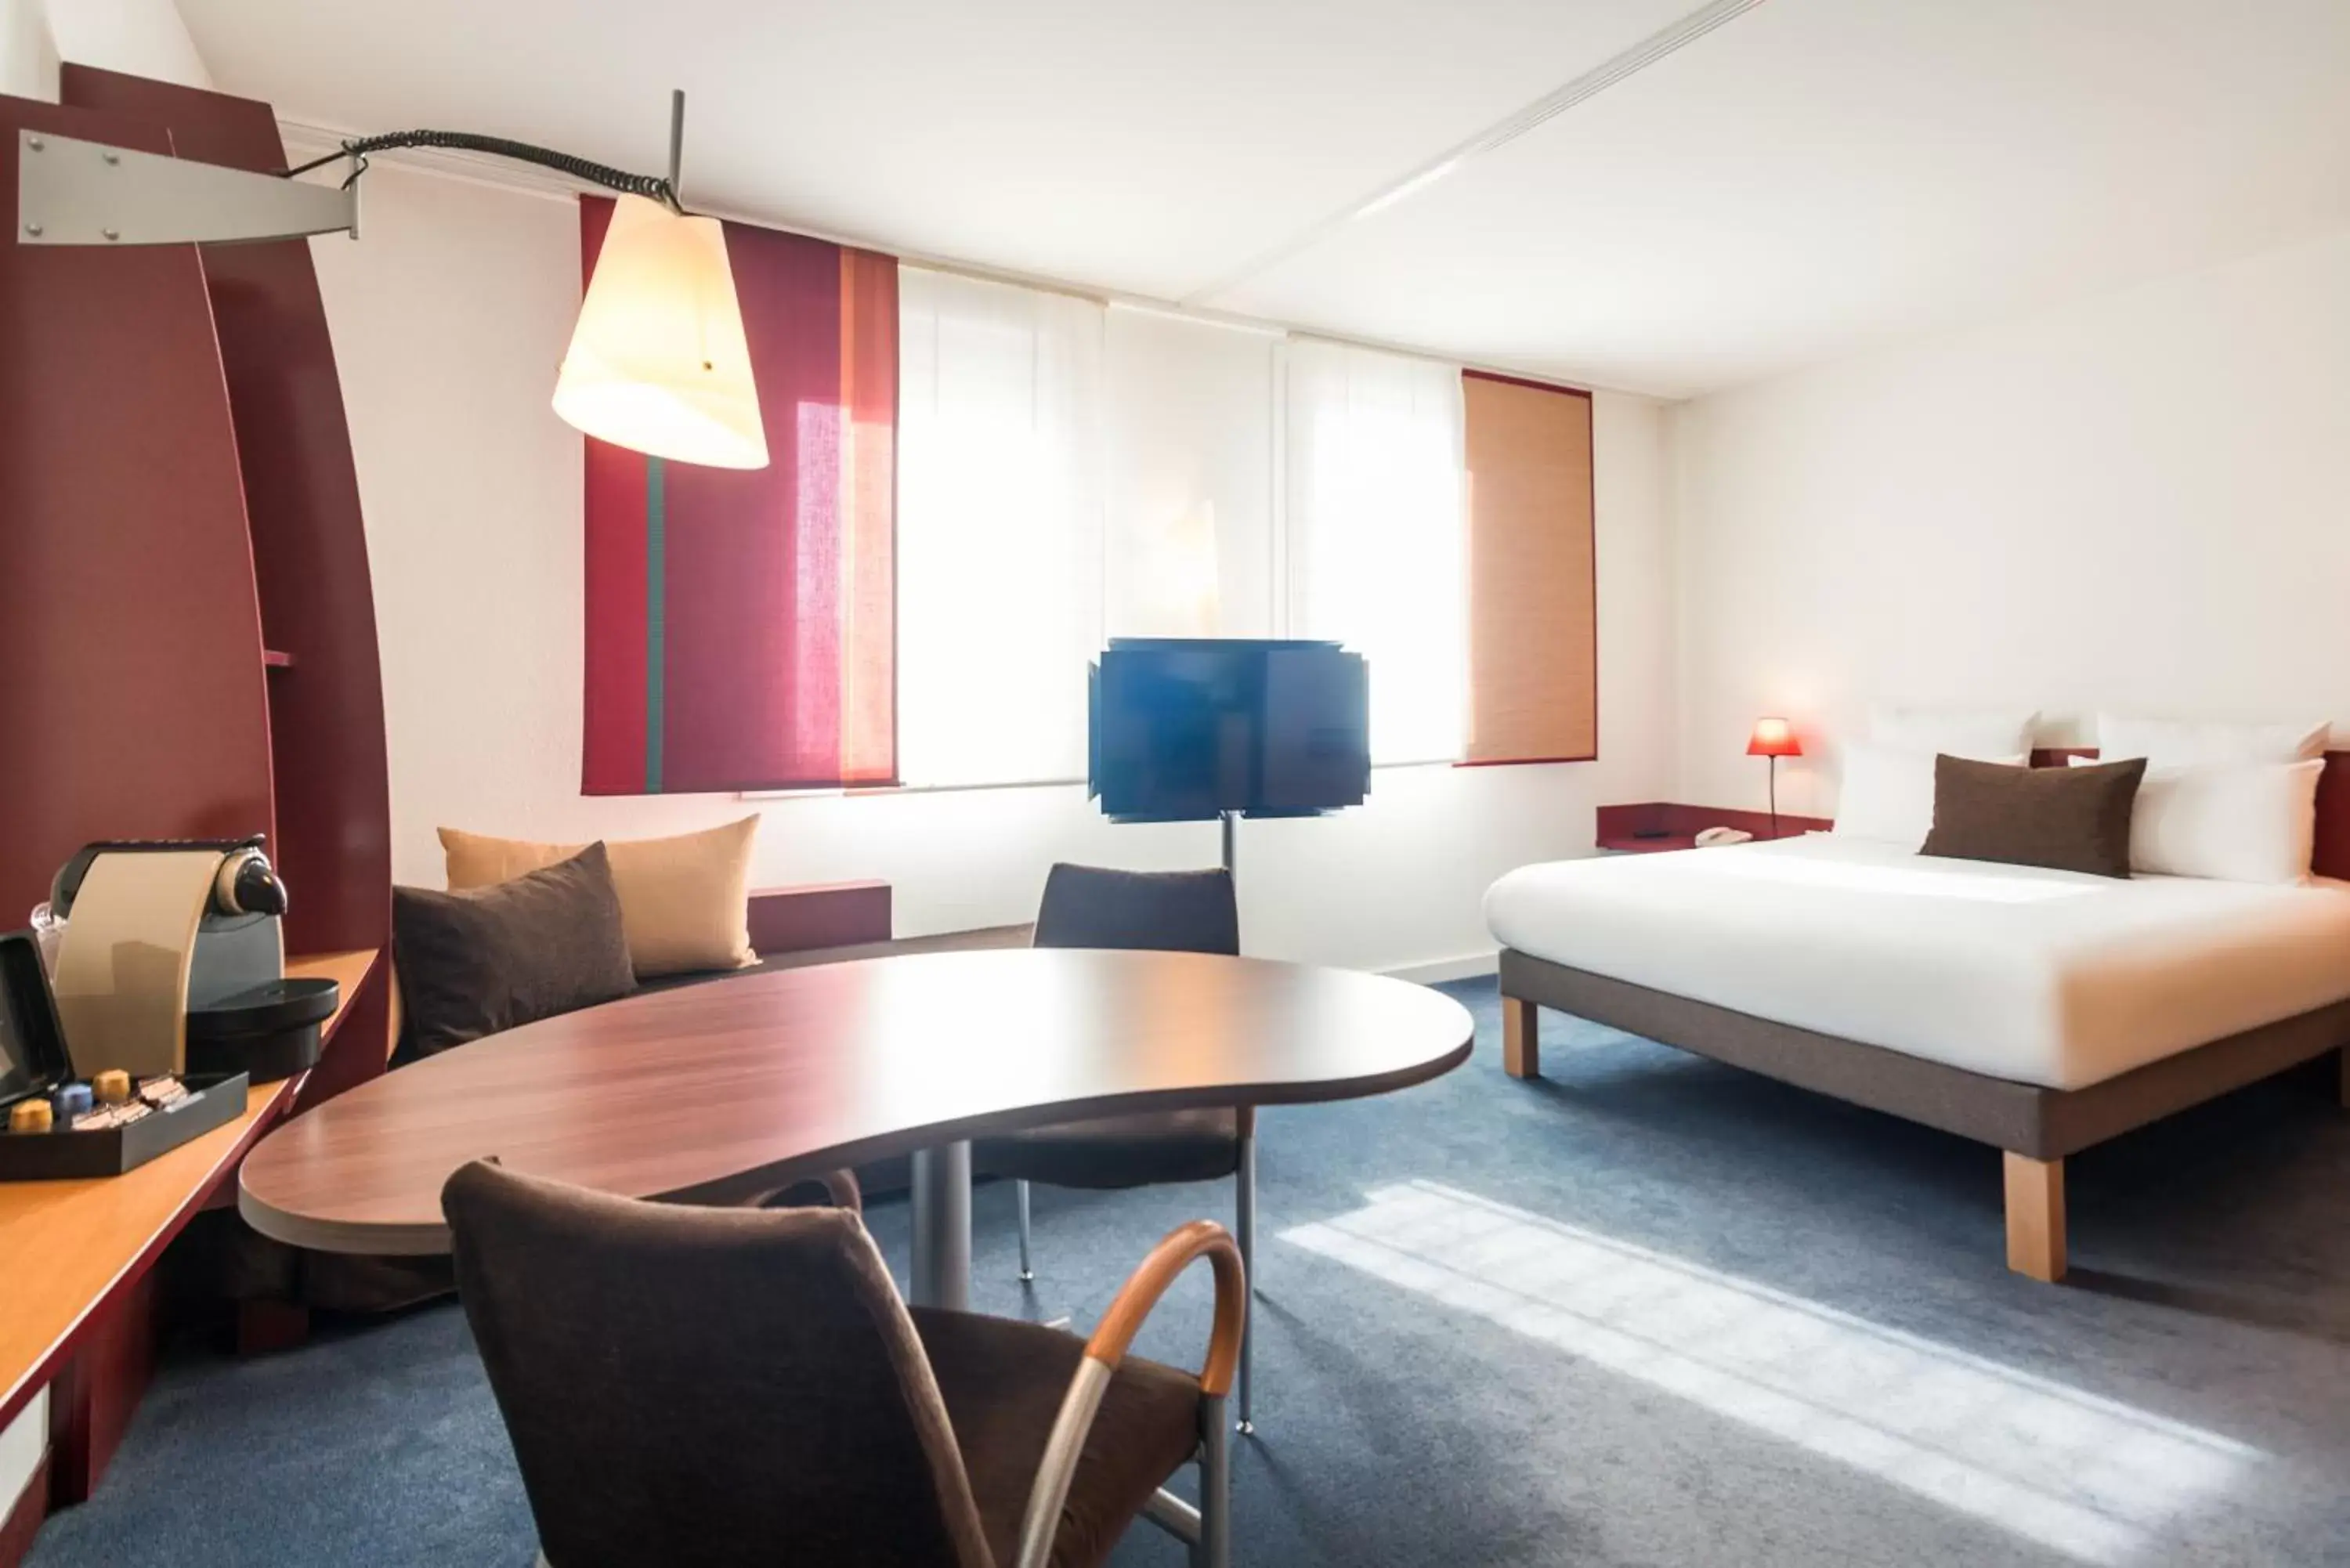 Superior Suite with 1 Double Bed and 1 Single Bed in Novotel Suites Reims Centre